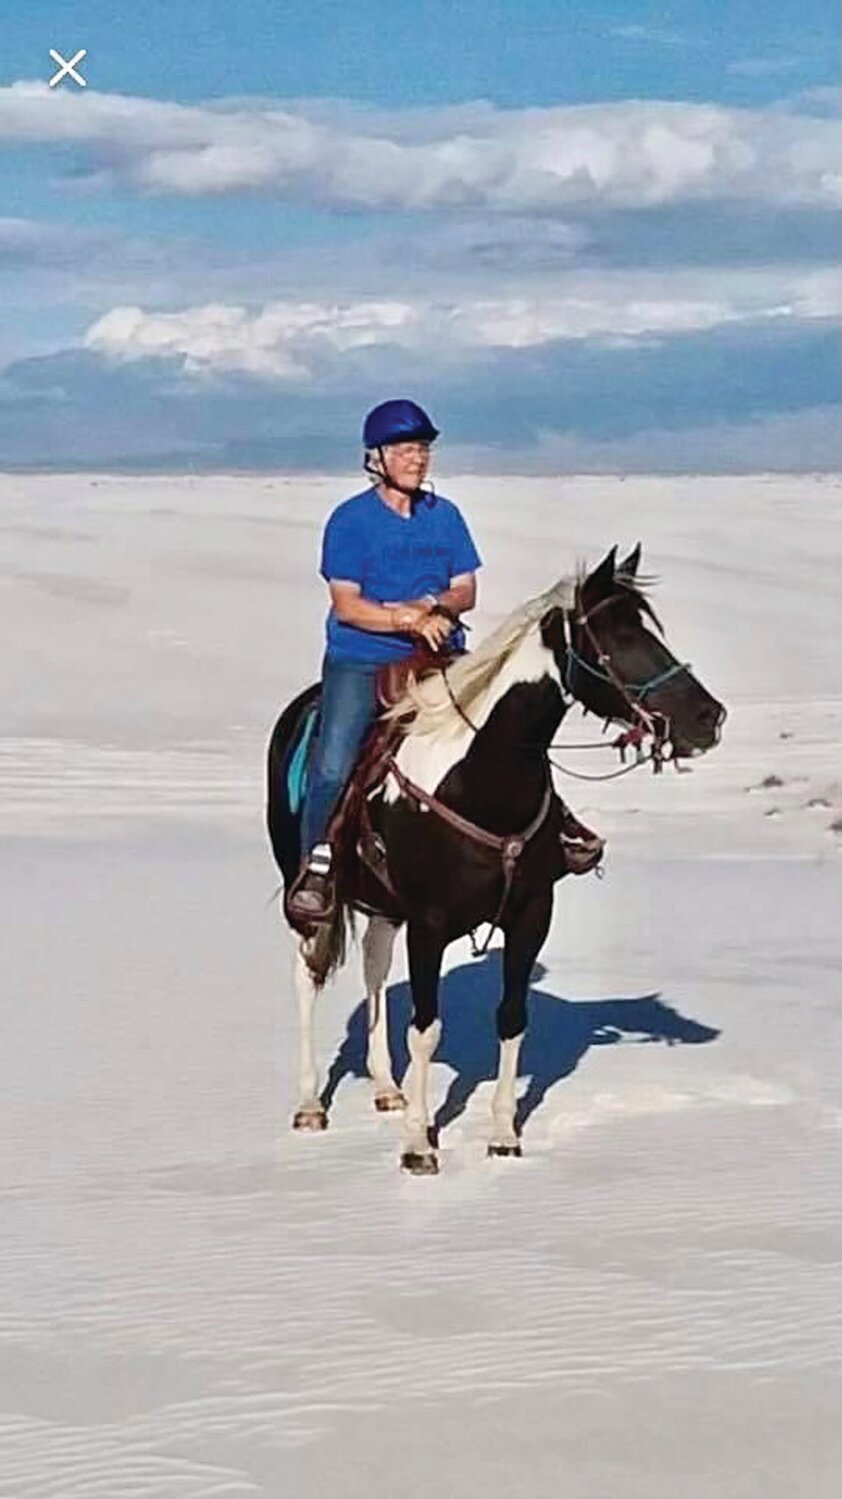 Riding in the desert in White Sands, New Mexico offered a new experience for Linda and Roxy.